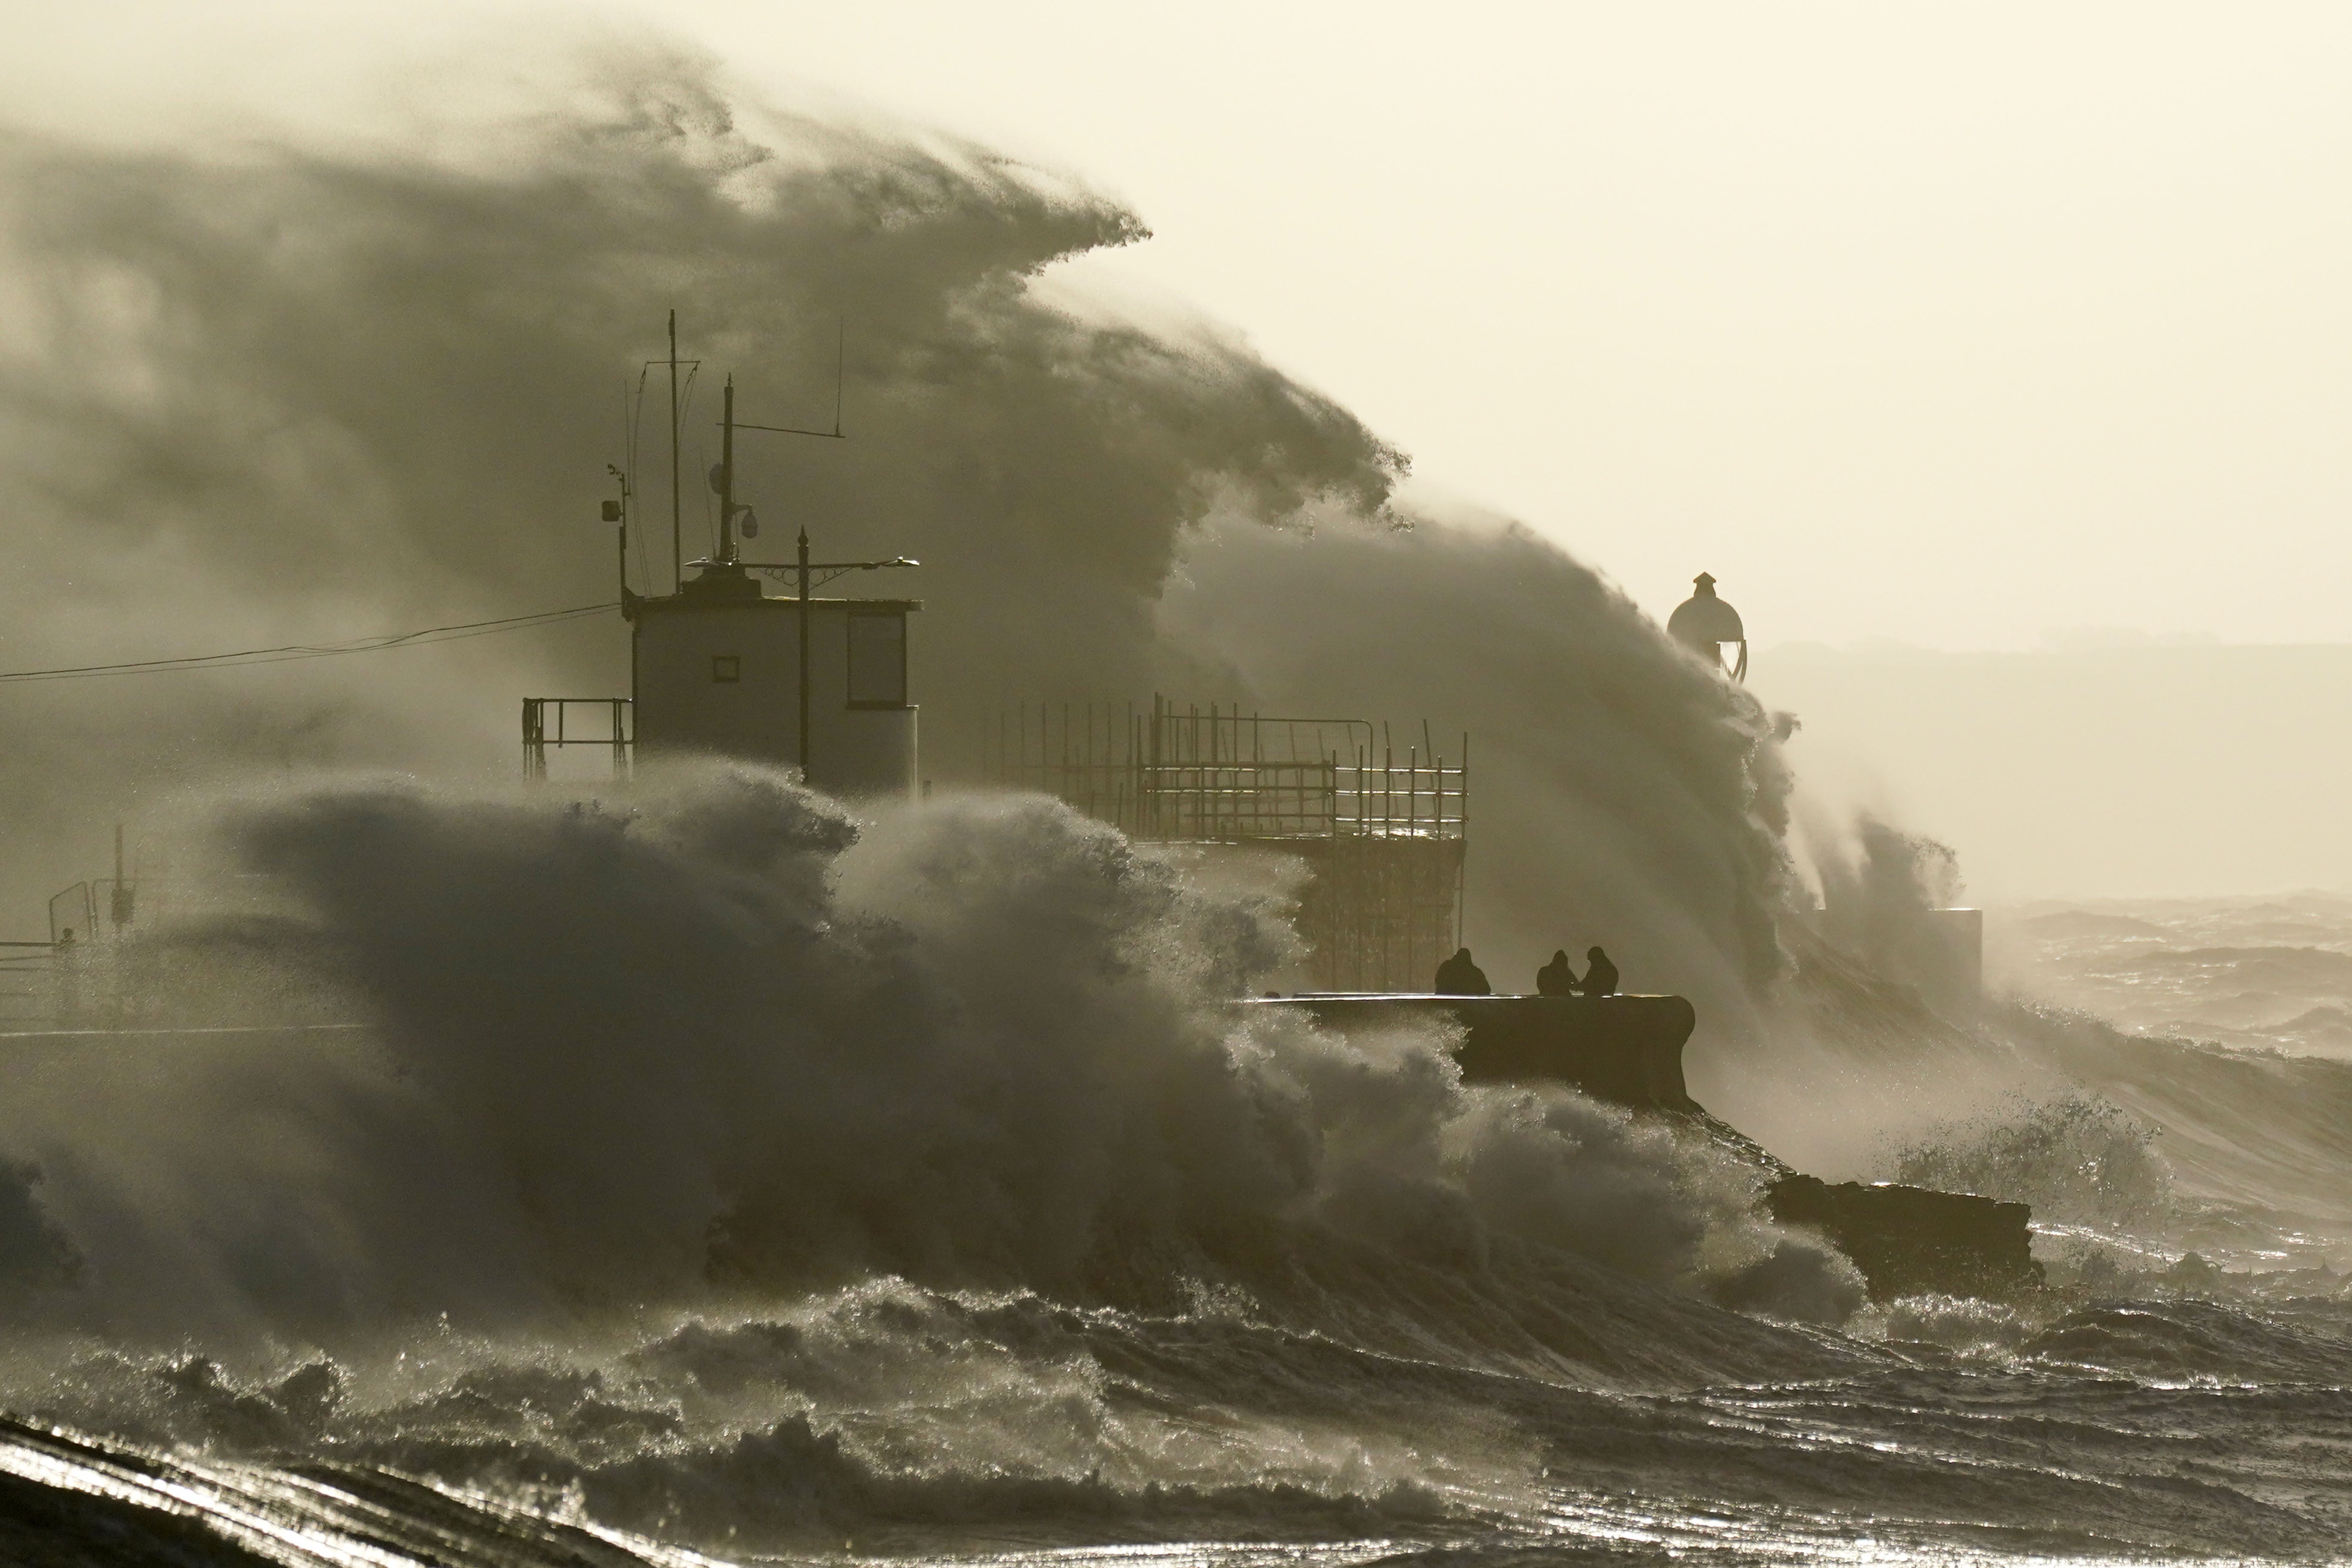 Waves crash against the sea wall and Porthcawl Lighthouse in Bridgend (Jacob King/PA)